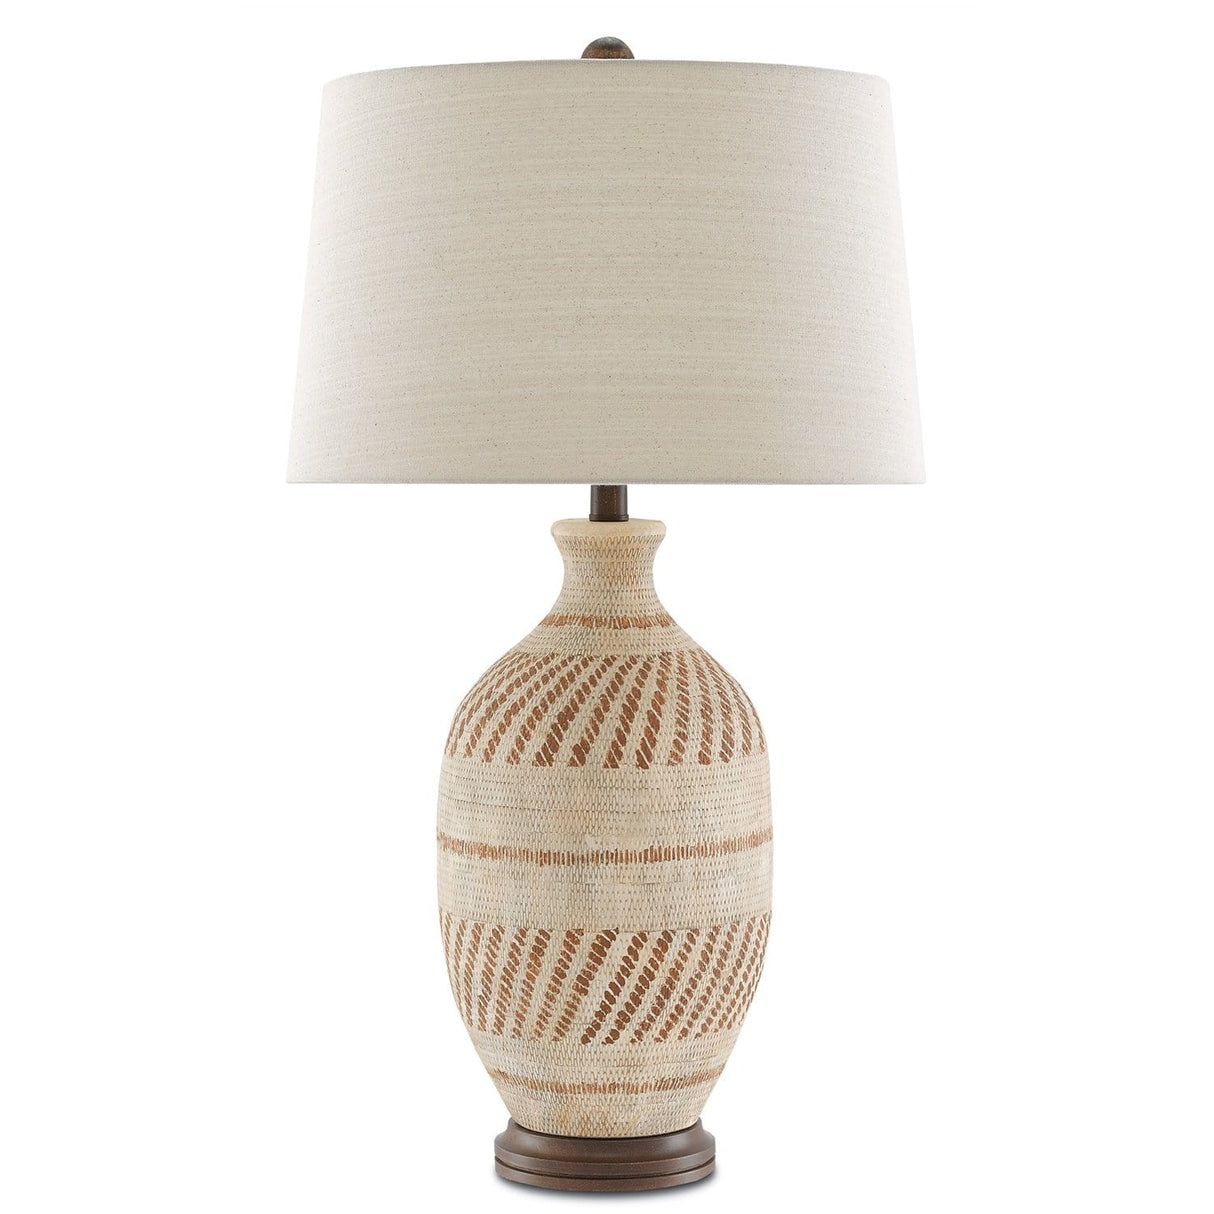 Currey and Company Faiyum Table Lamp Lighting Currey-Co-6000-0088